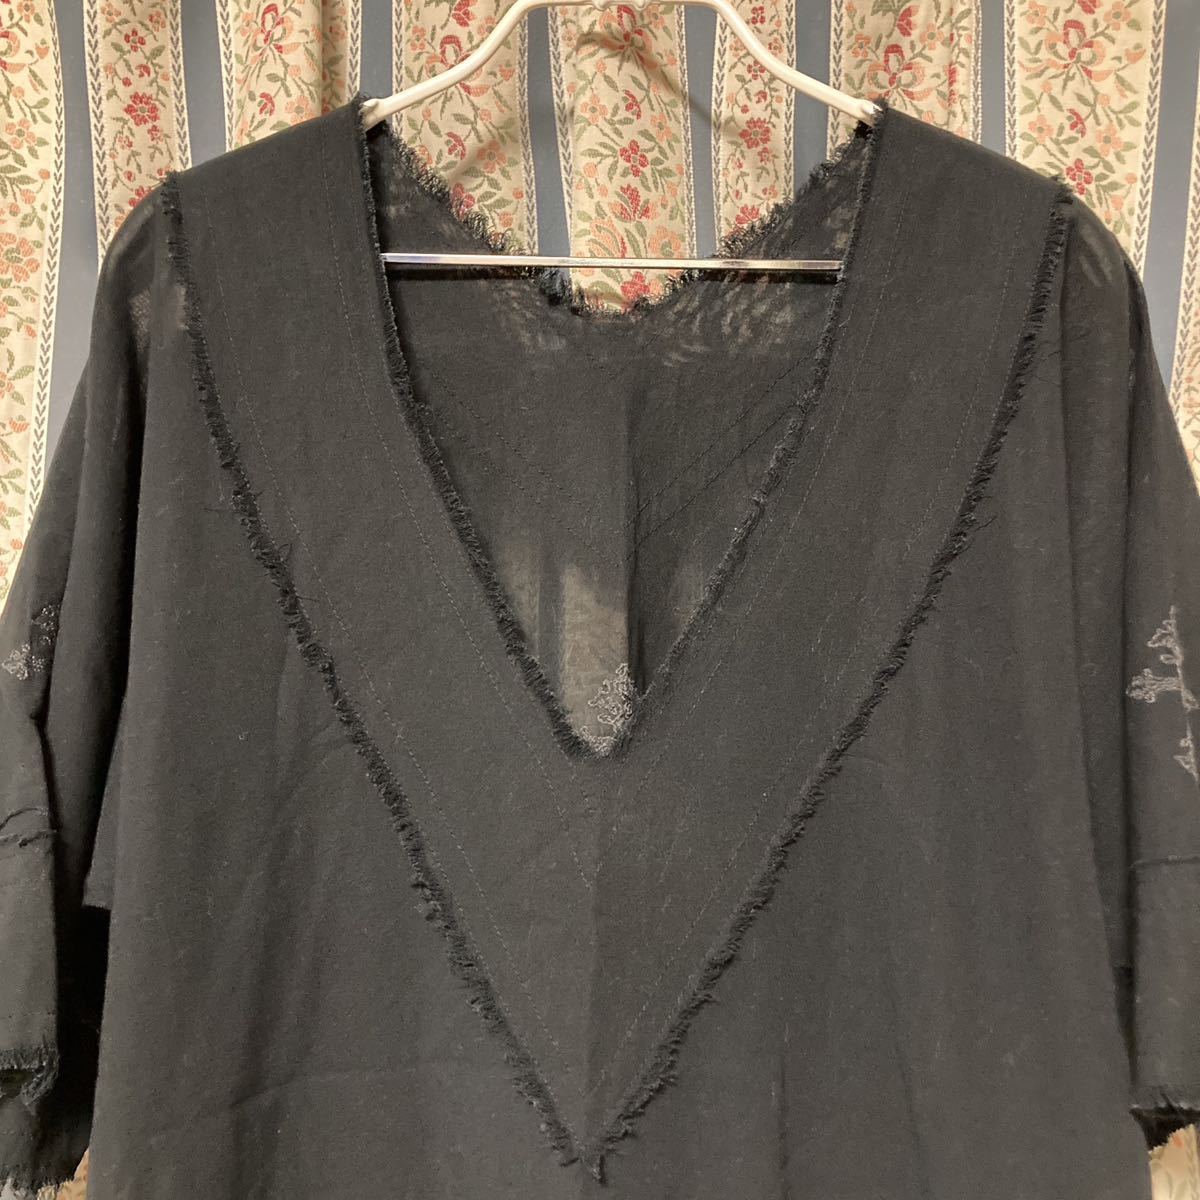  Hysteric Glamour Cross 10 character . embroidery race sia- pull over blouse tops shirt cloth . T-shirt gothic black 